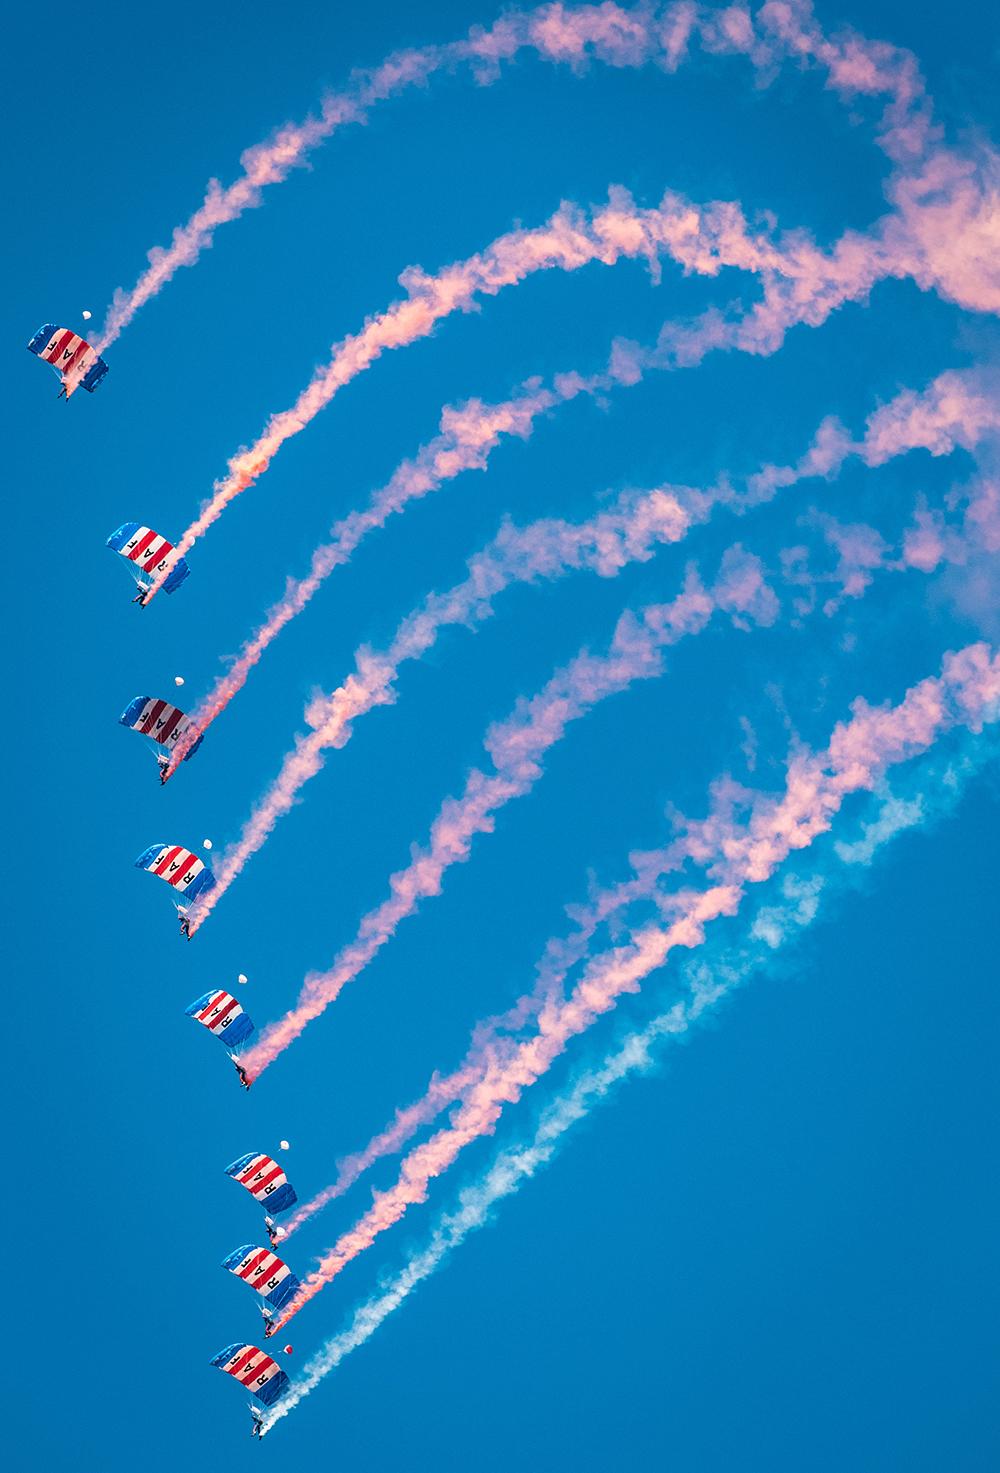 The RAF Falcons perform their famous non-contact canopy stack for the crowds